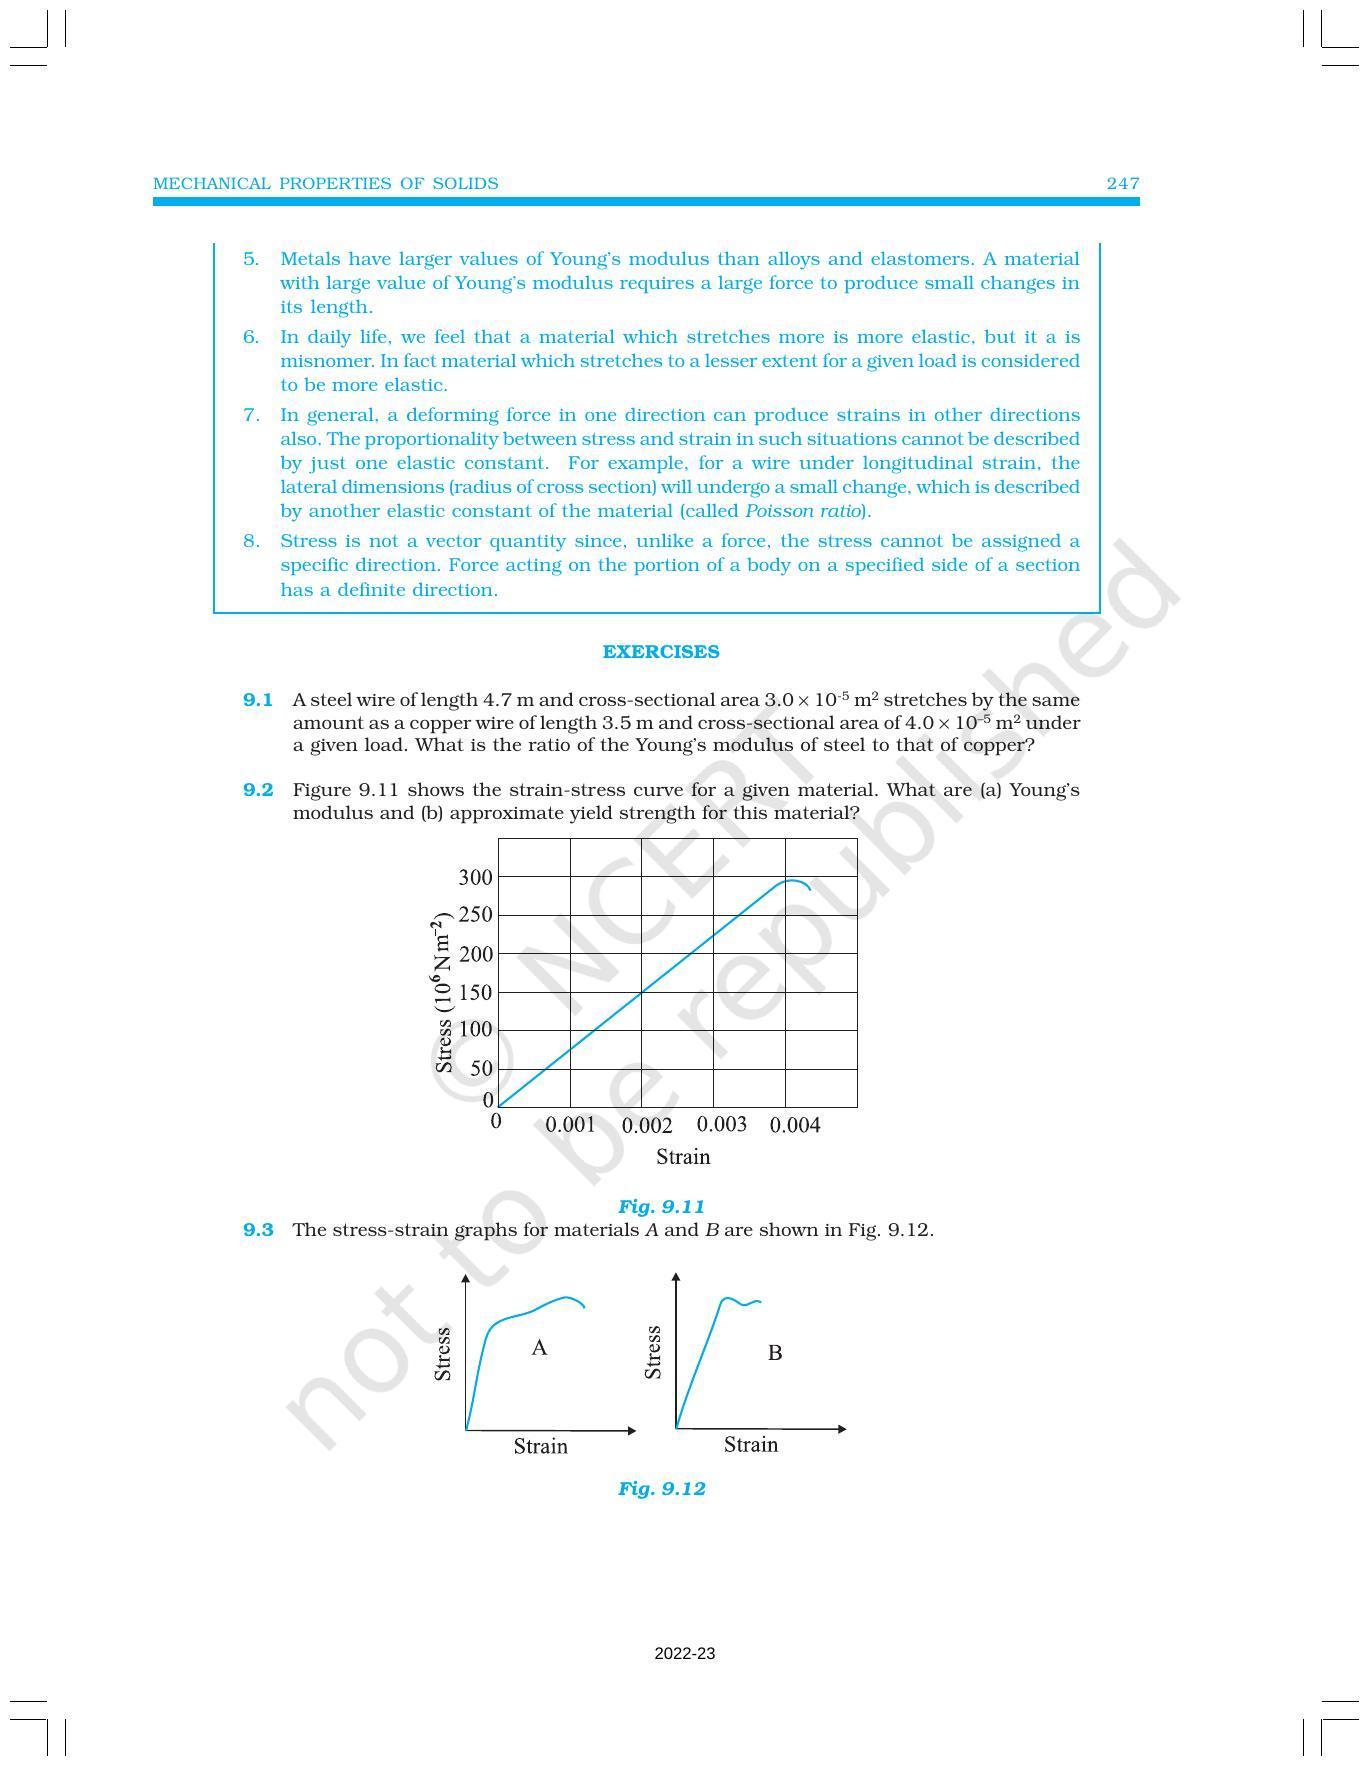 NCERT Book for Class 11 Physics Chapter 9 Mechanical Properties of Solids - Page 13